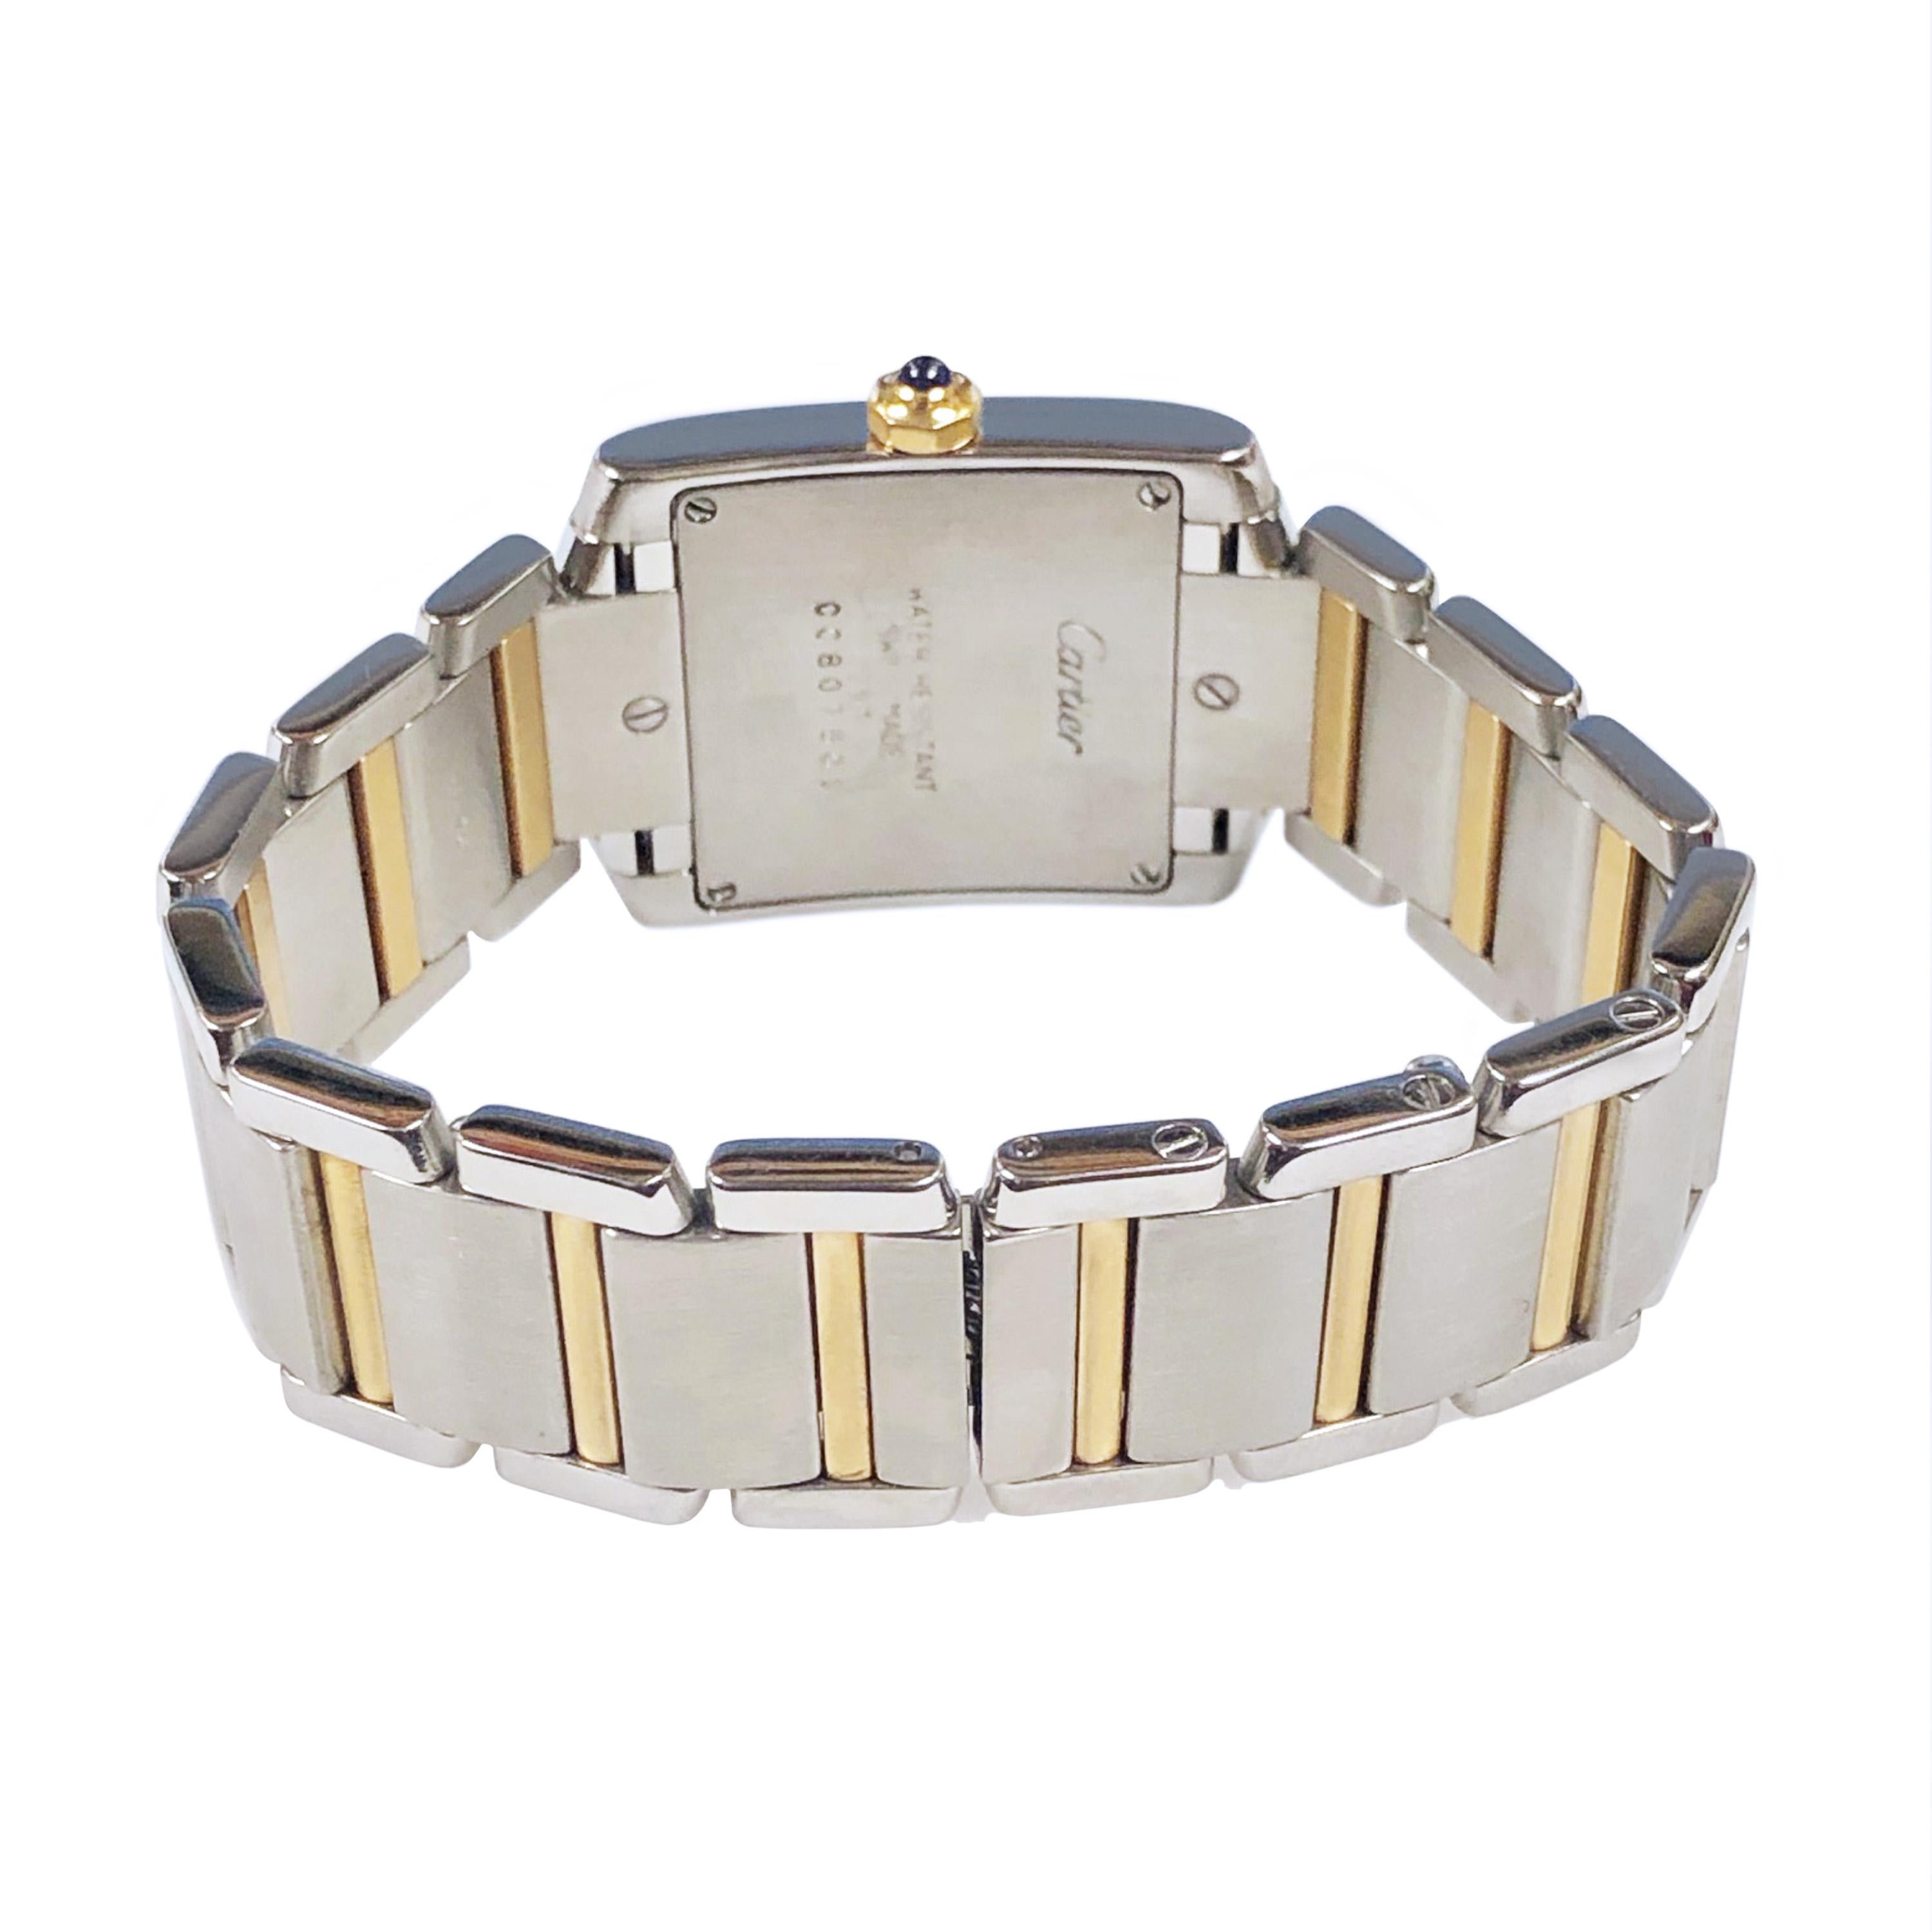 Cartier Tank Francaise Steel and Yellow Gold Mid Size Quartz Wristwatch 1